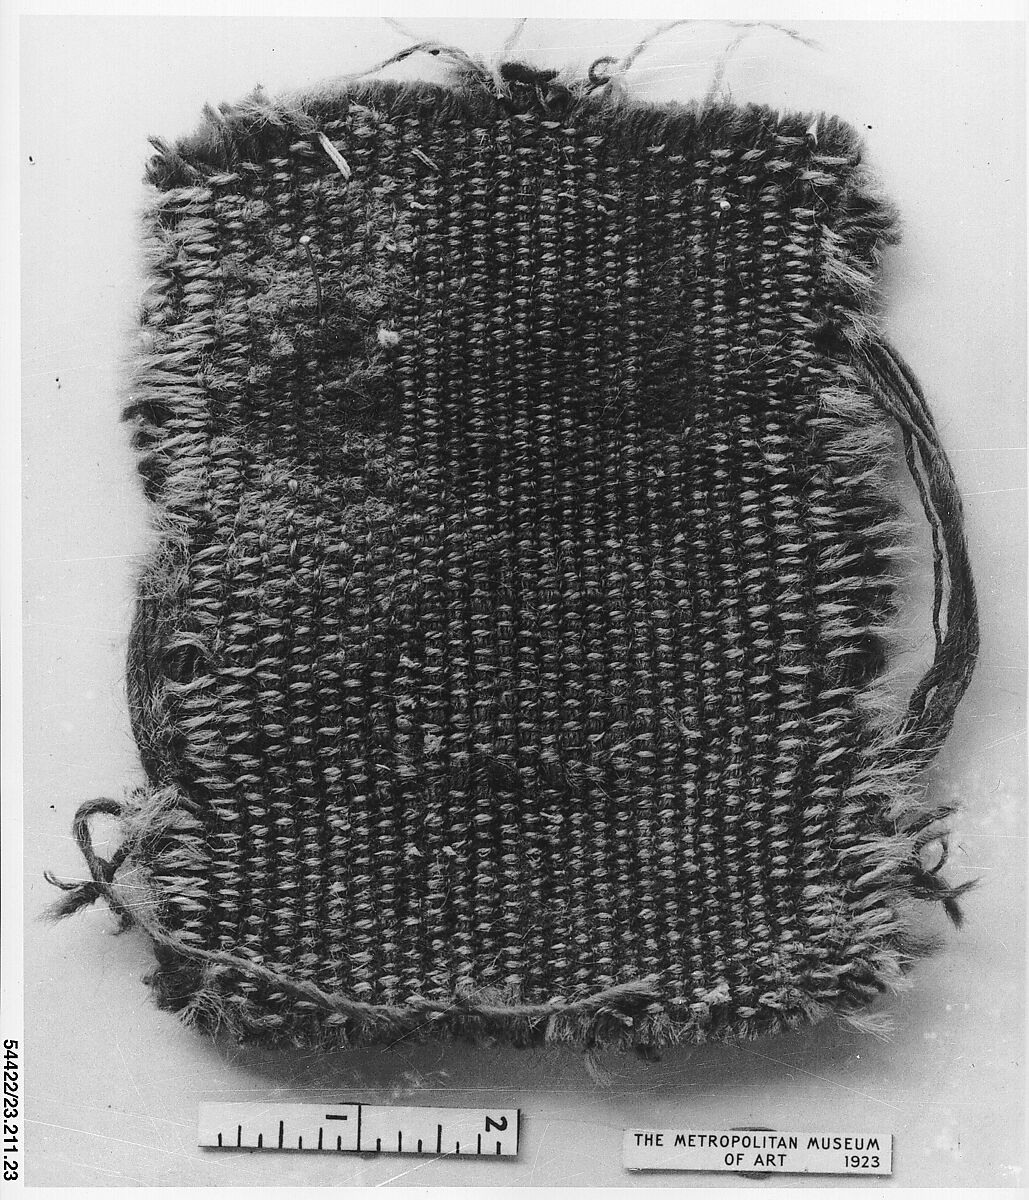 Rug fragment, Wool (Spanish knot; each knot tied on alternate warp threads with six weft threads inserted after each row of knots.), Spanish 